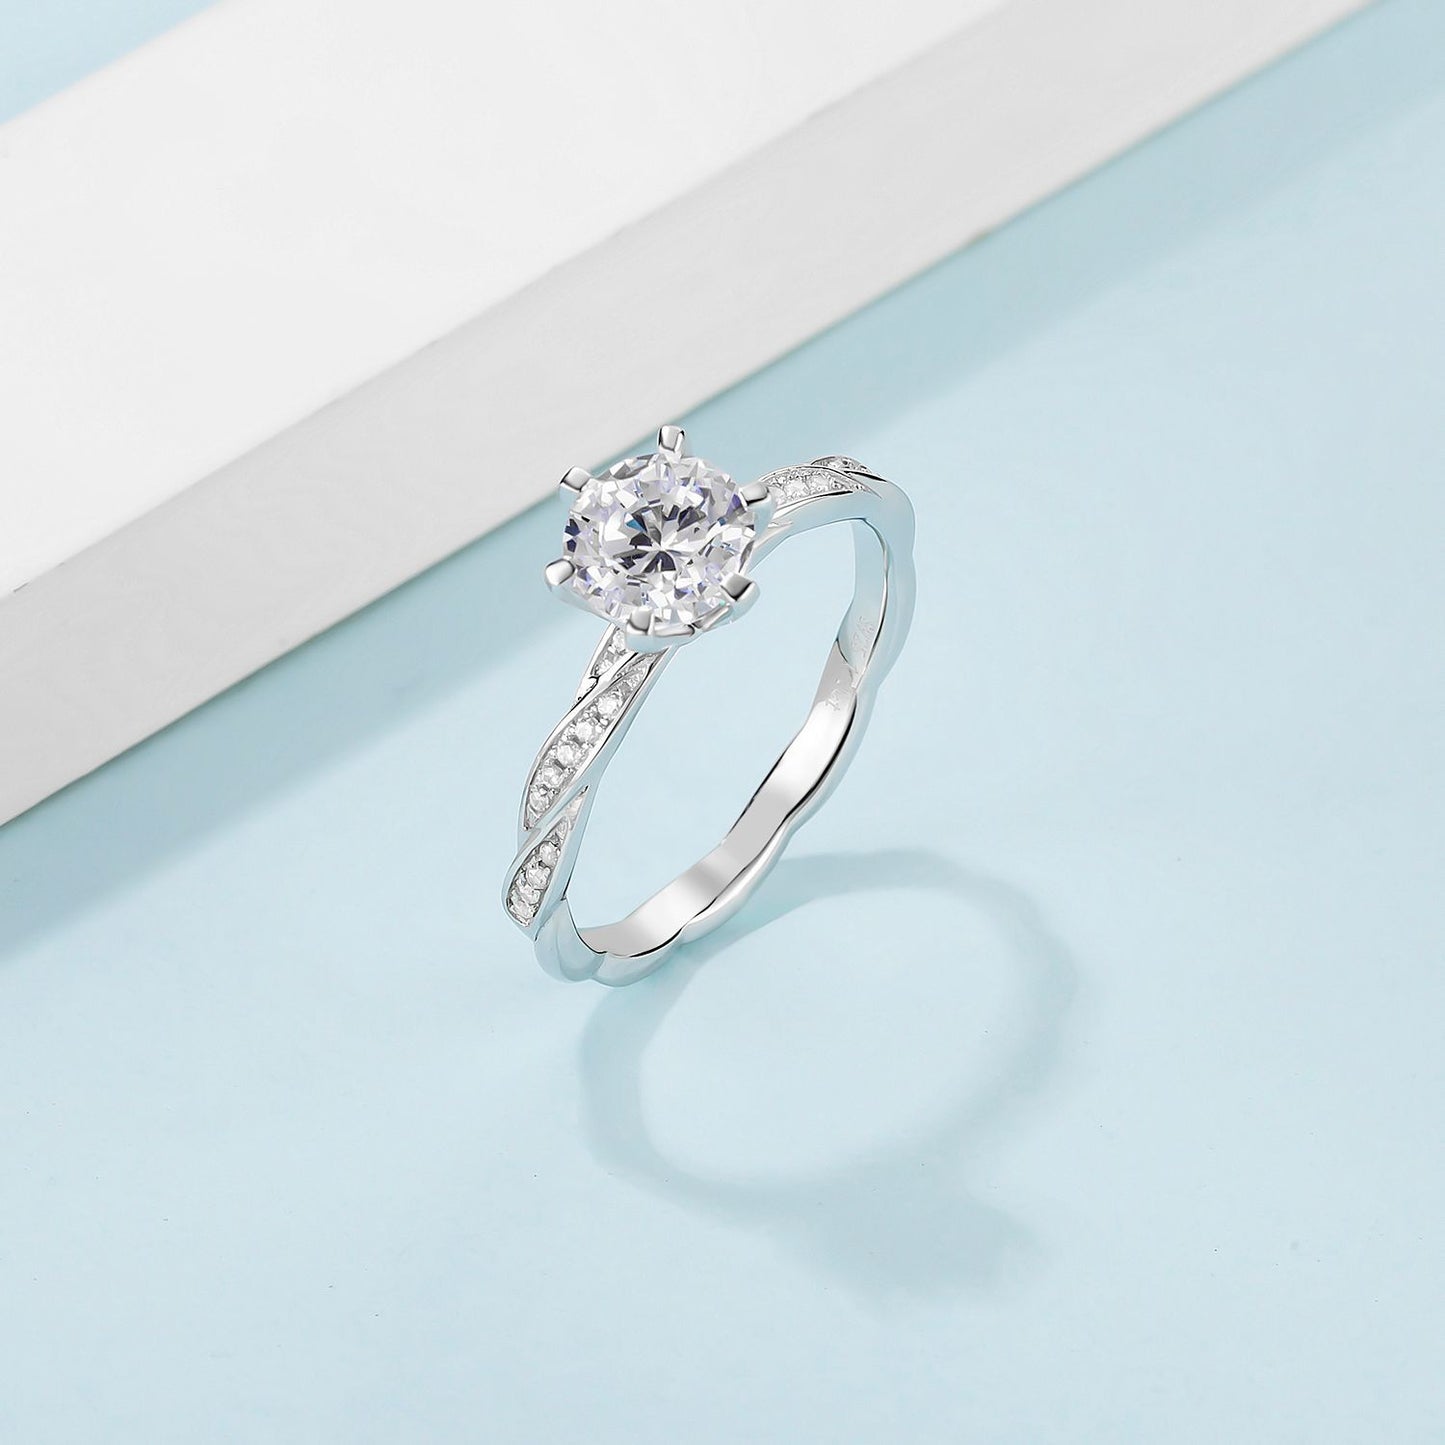 Twisted Arm 1.0 Carat Round Cut Moissanite Engagement Ring